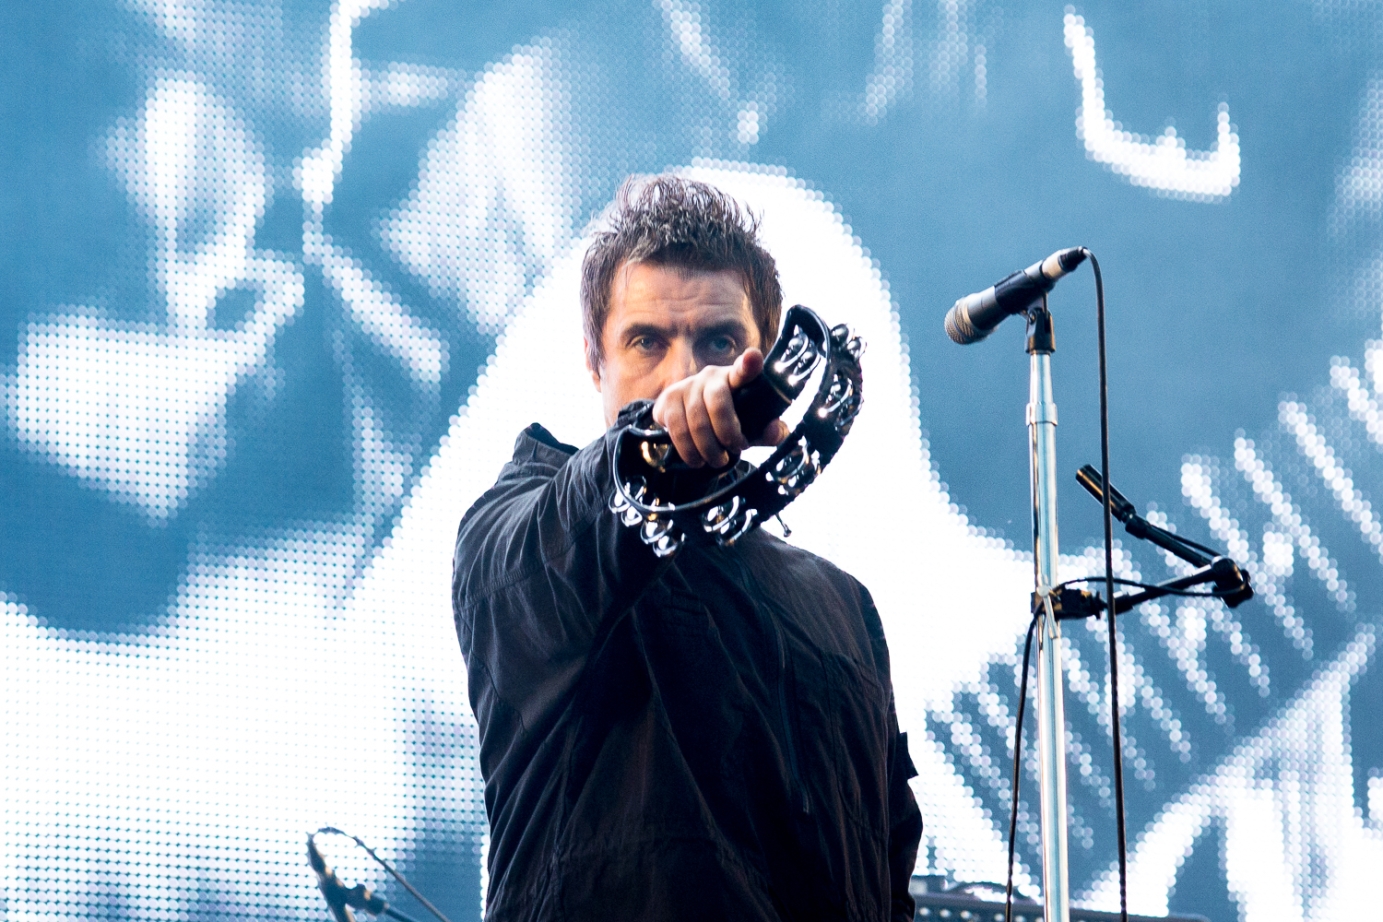 Live photography for Liam Gallagher by Michelle Roberts